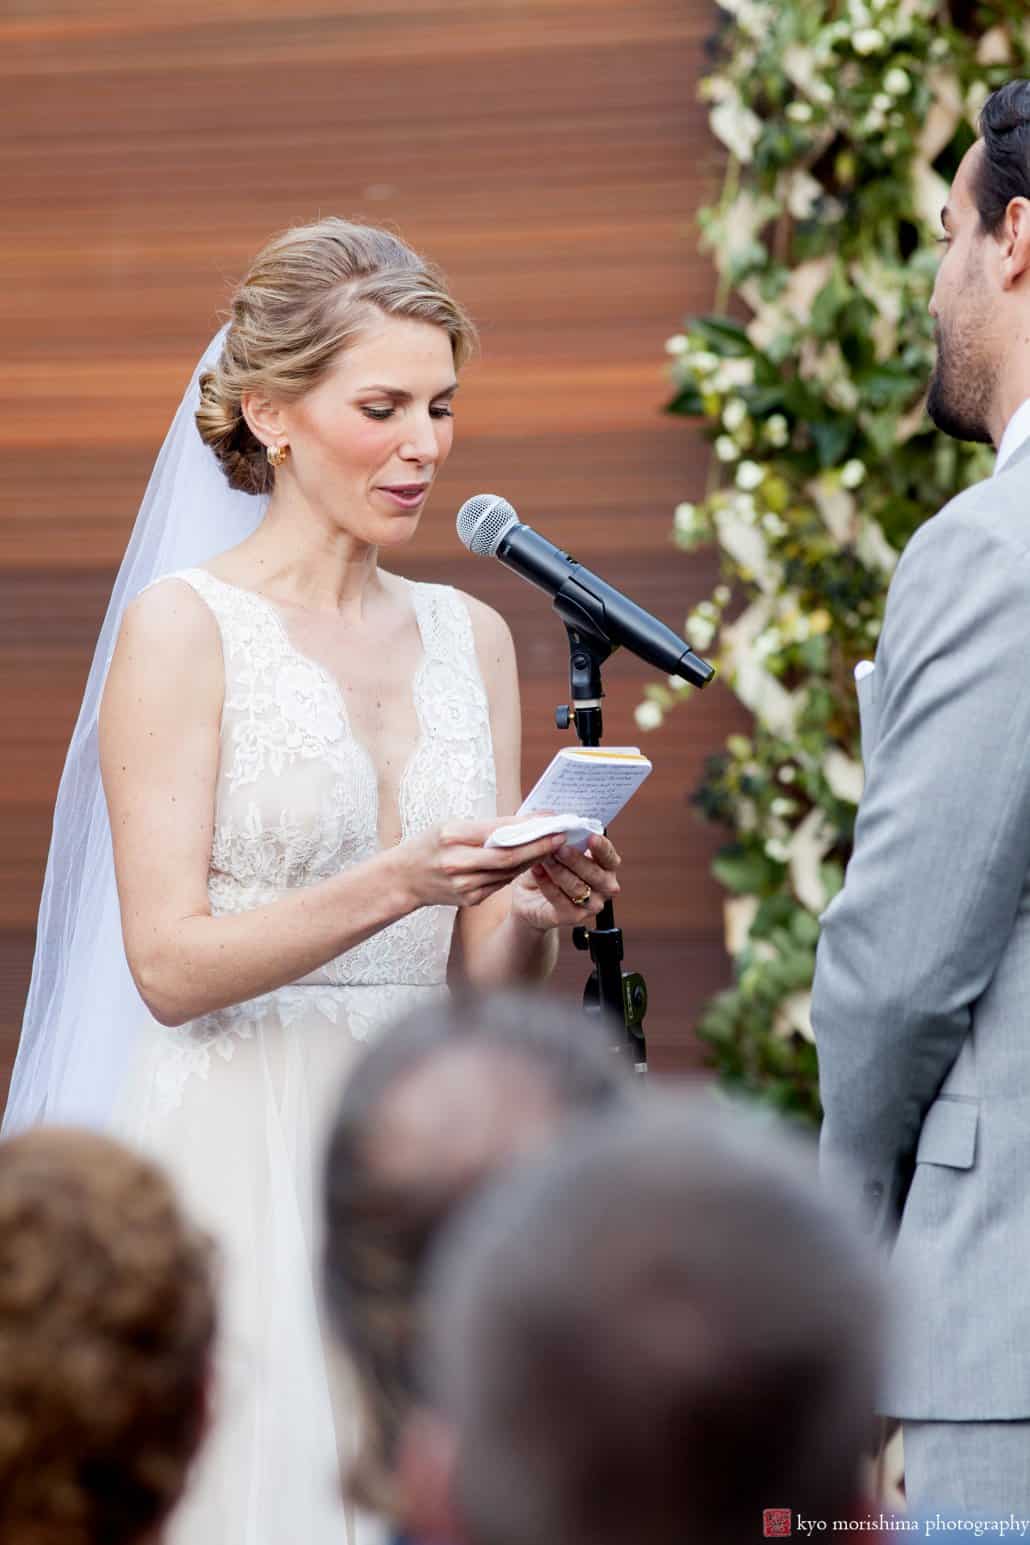 Bride reads vows to groom during Green Building wedding in outdoor courtyard, photographed by Brooklyn wedding photographer Kyo Morishima